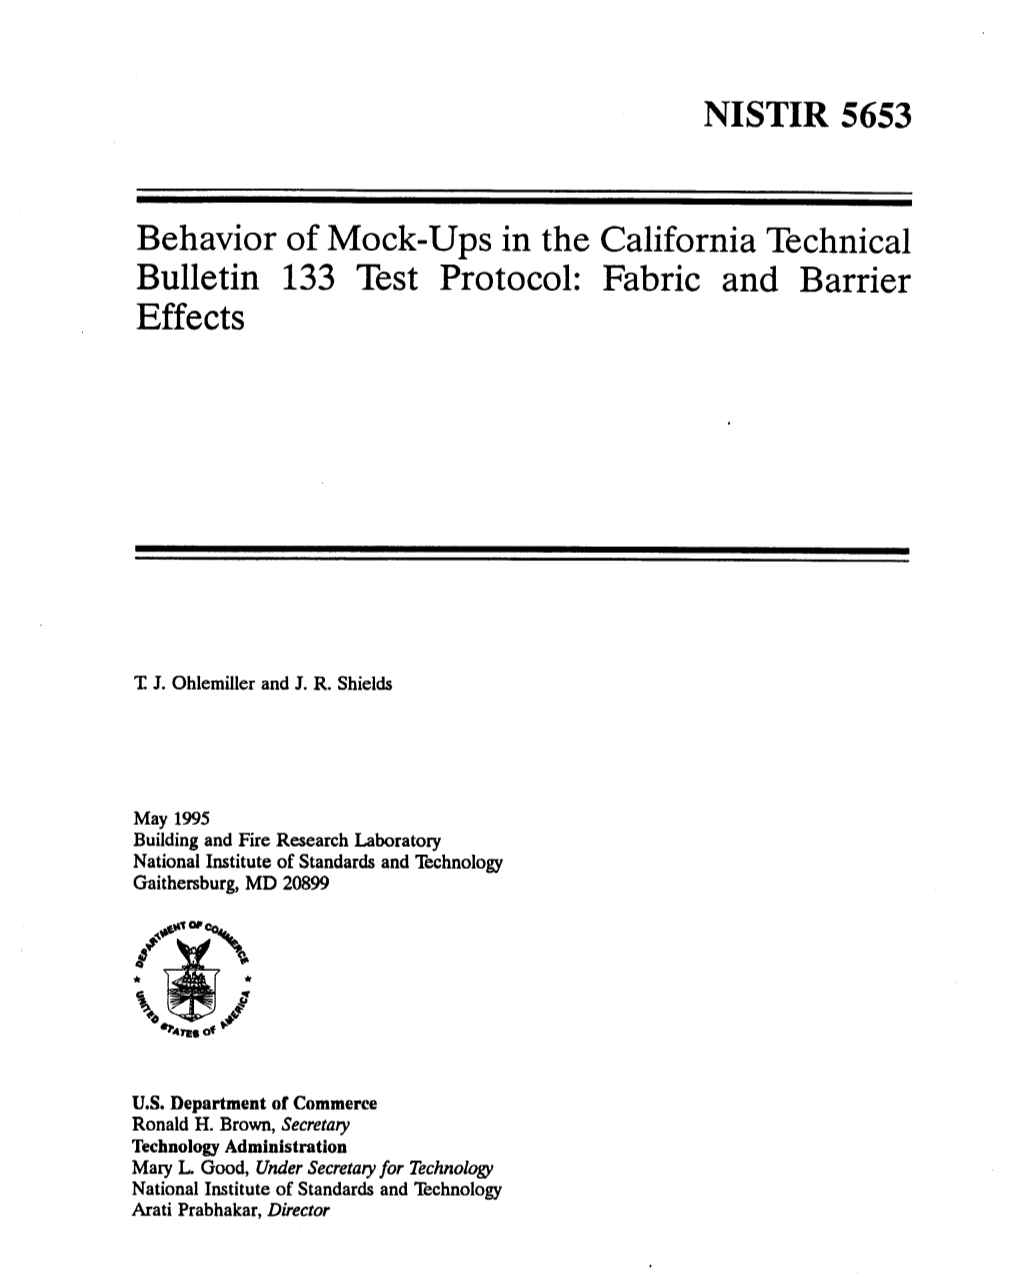 Behavior of Mock-Ups in the California Technical Bulletin 133 Test Protocol: Fabric and Barrier Effects